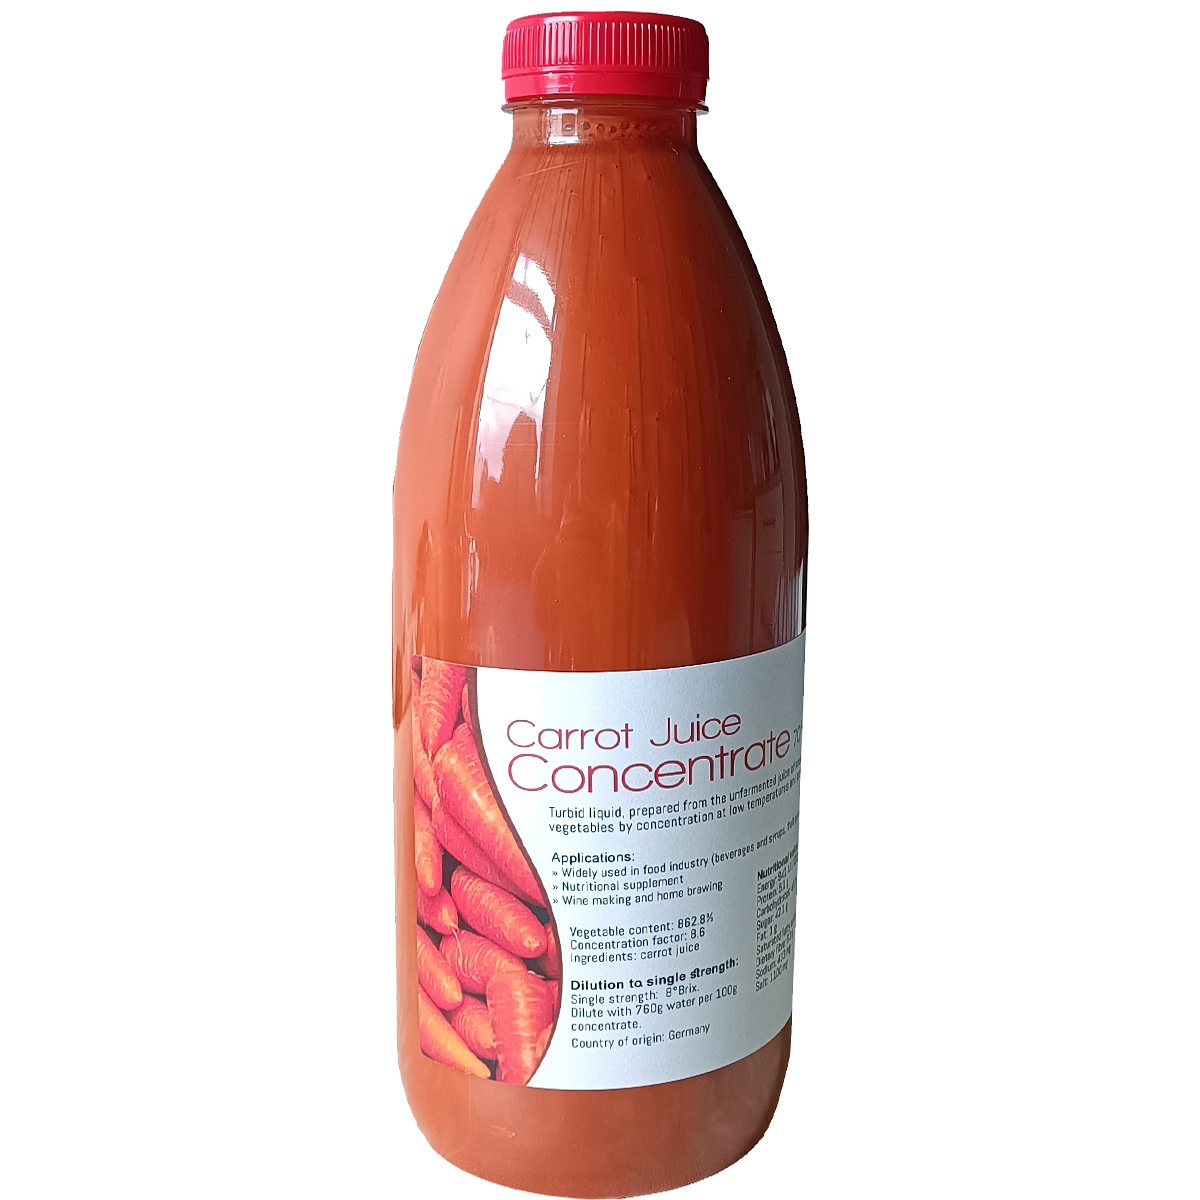 Carro juice concentrated